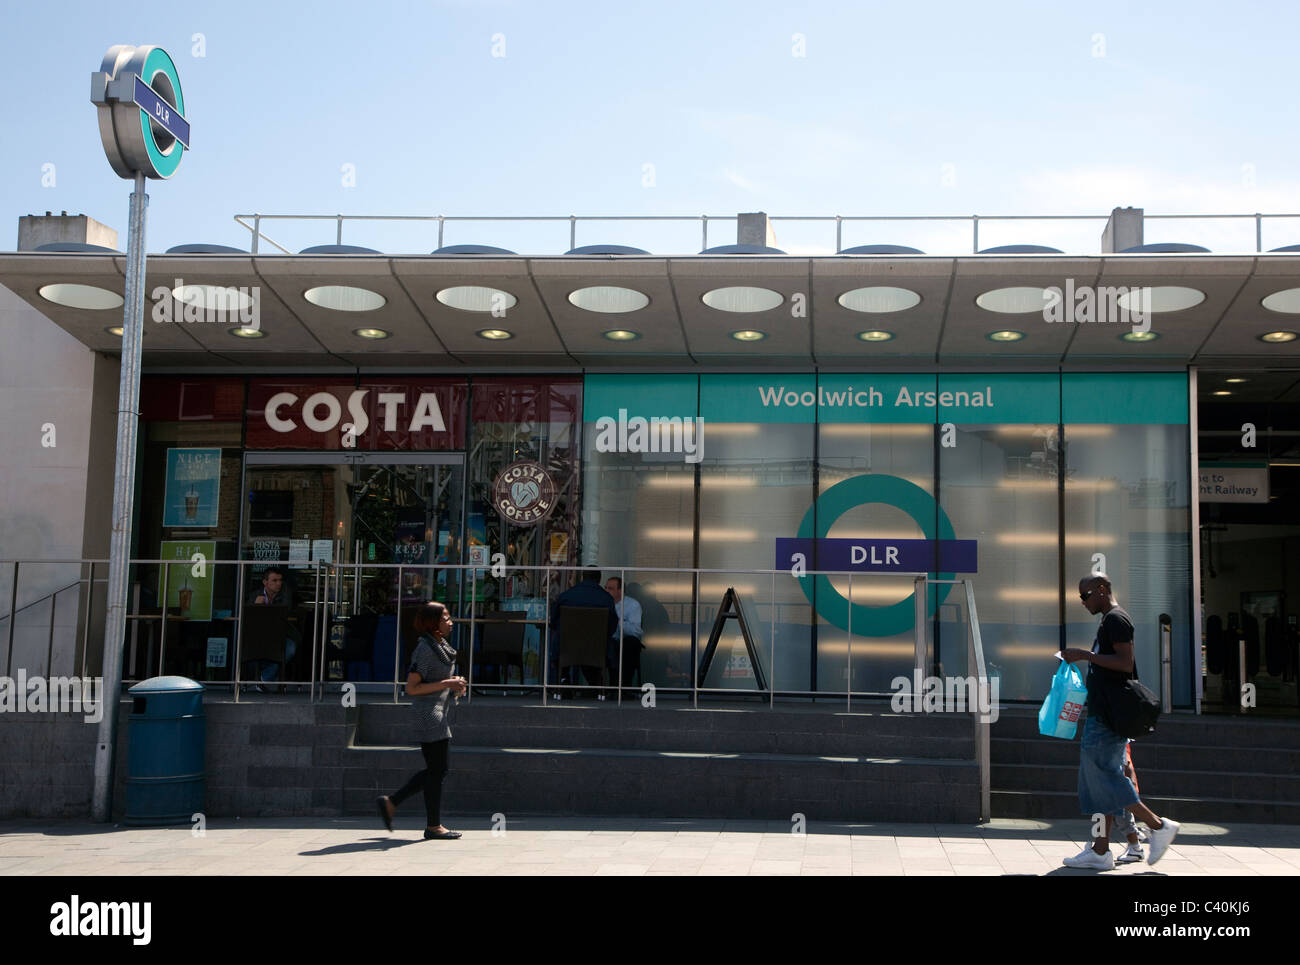 Woolwich Arsenal Docklands Light Railway station, London Banque D'Images